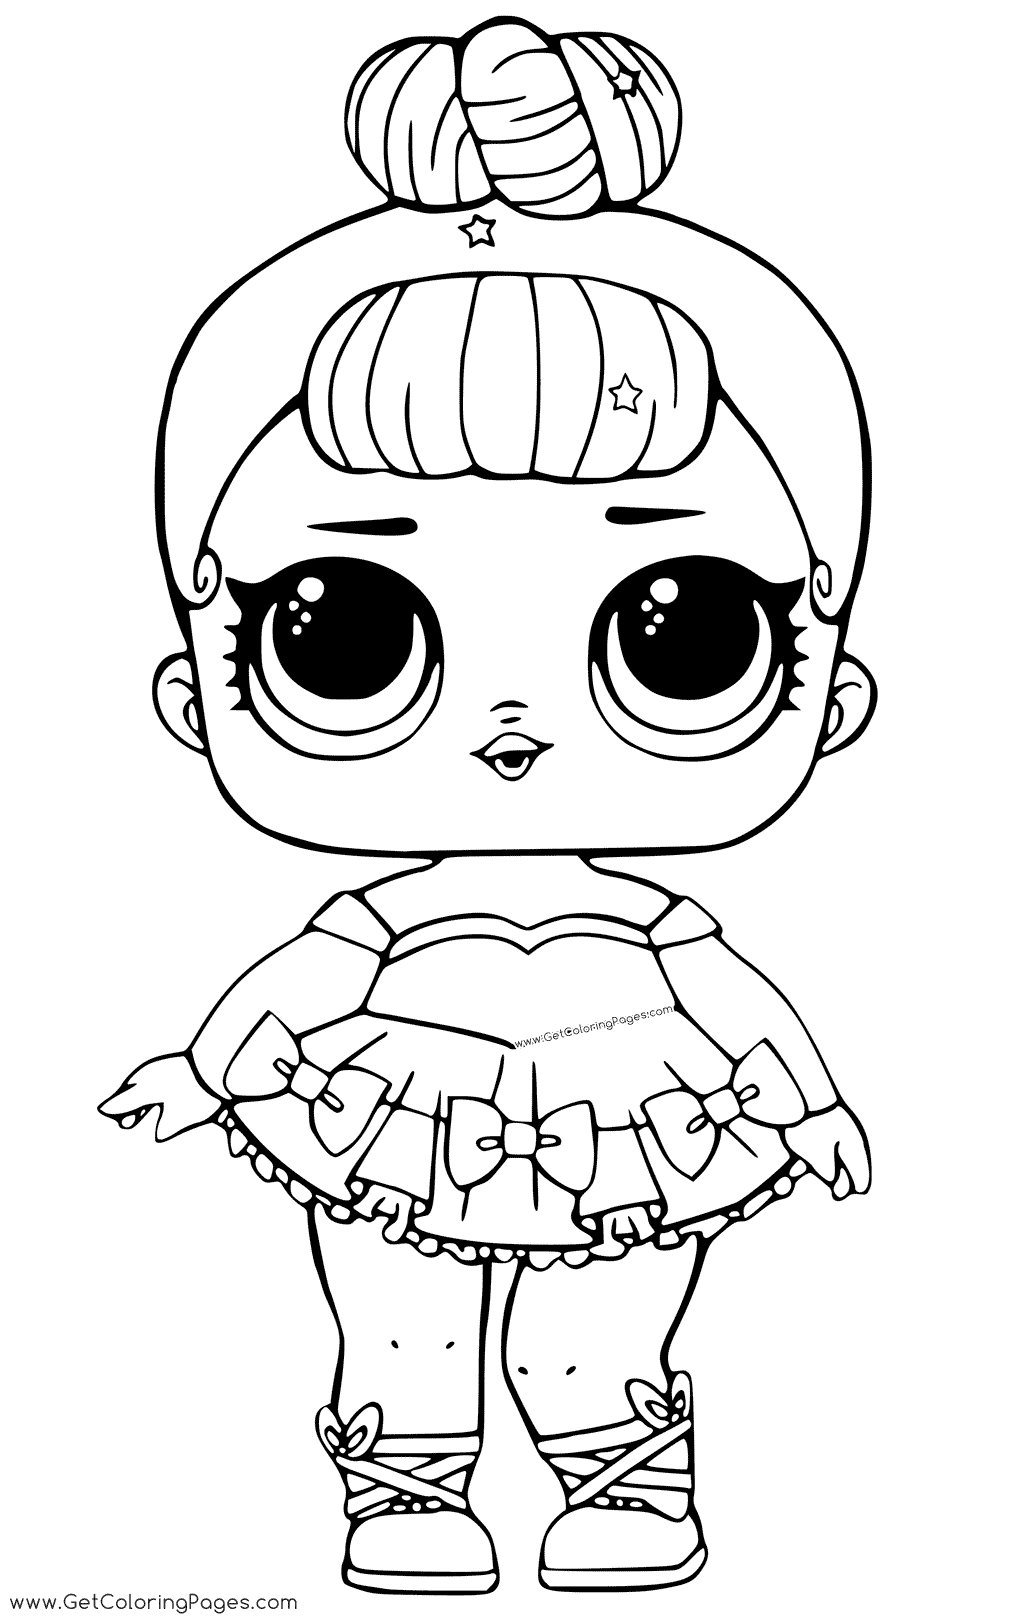 Lol Doll Coloring Pages at GetColorings.com  Free printable colorings pages to print and color